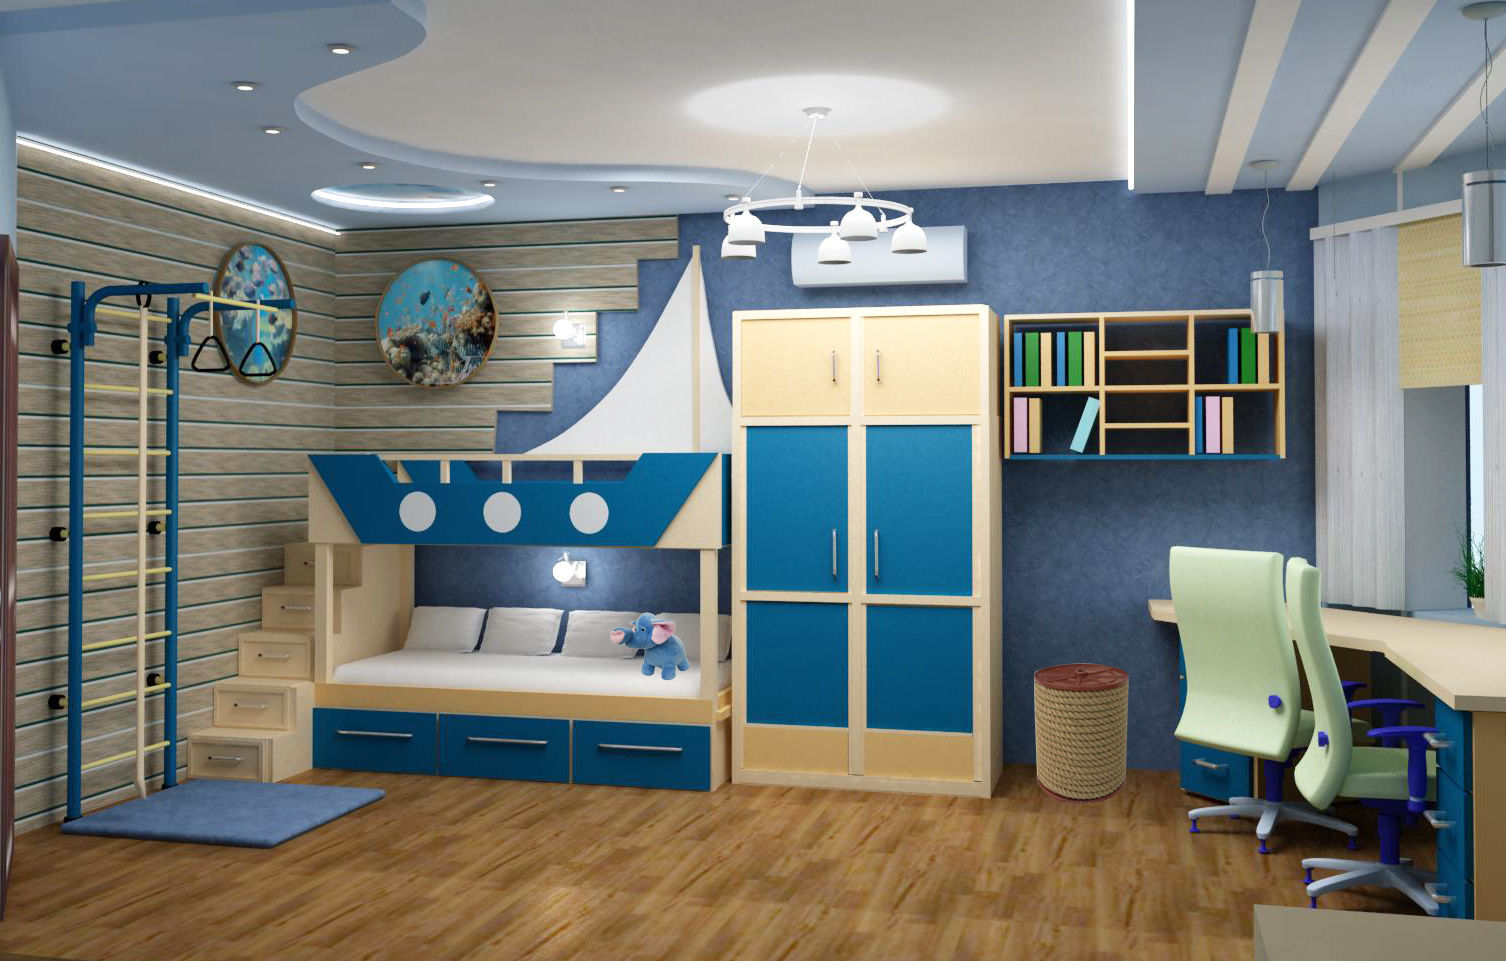 Nautical style for the decor of a spacious children's room for a boy